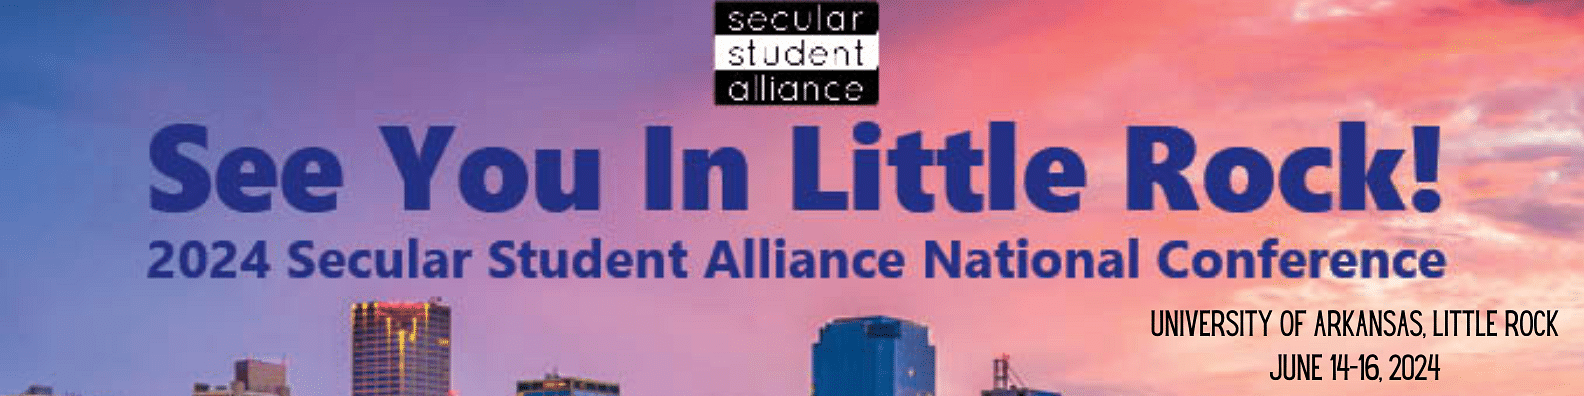 Secular Student Alliance 2024 National Conference